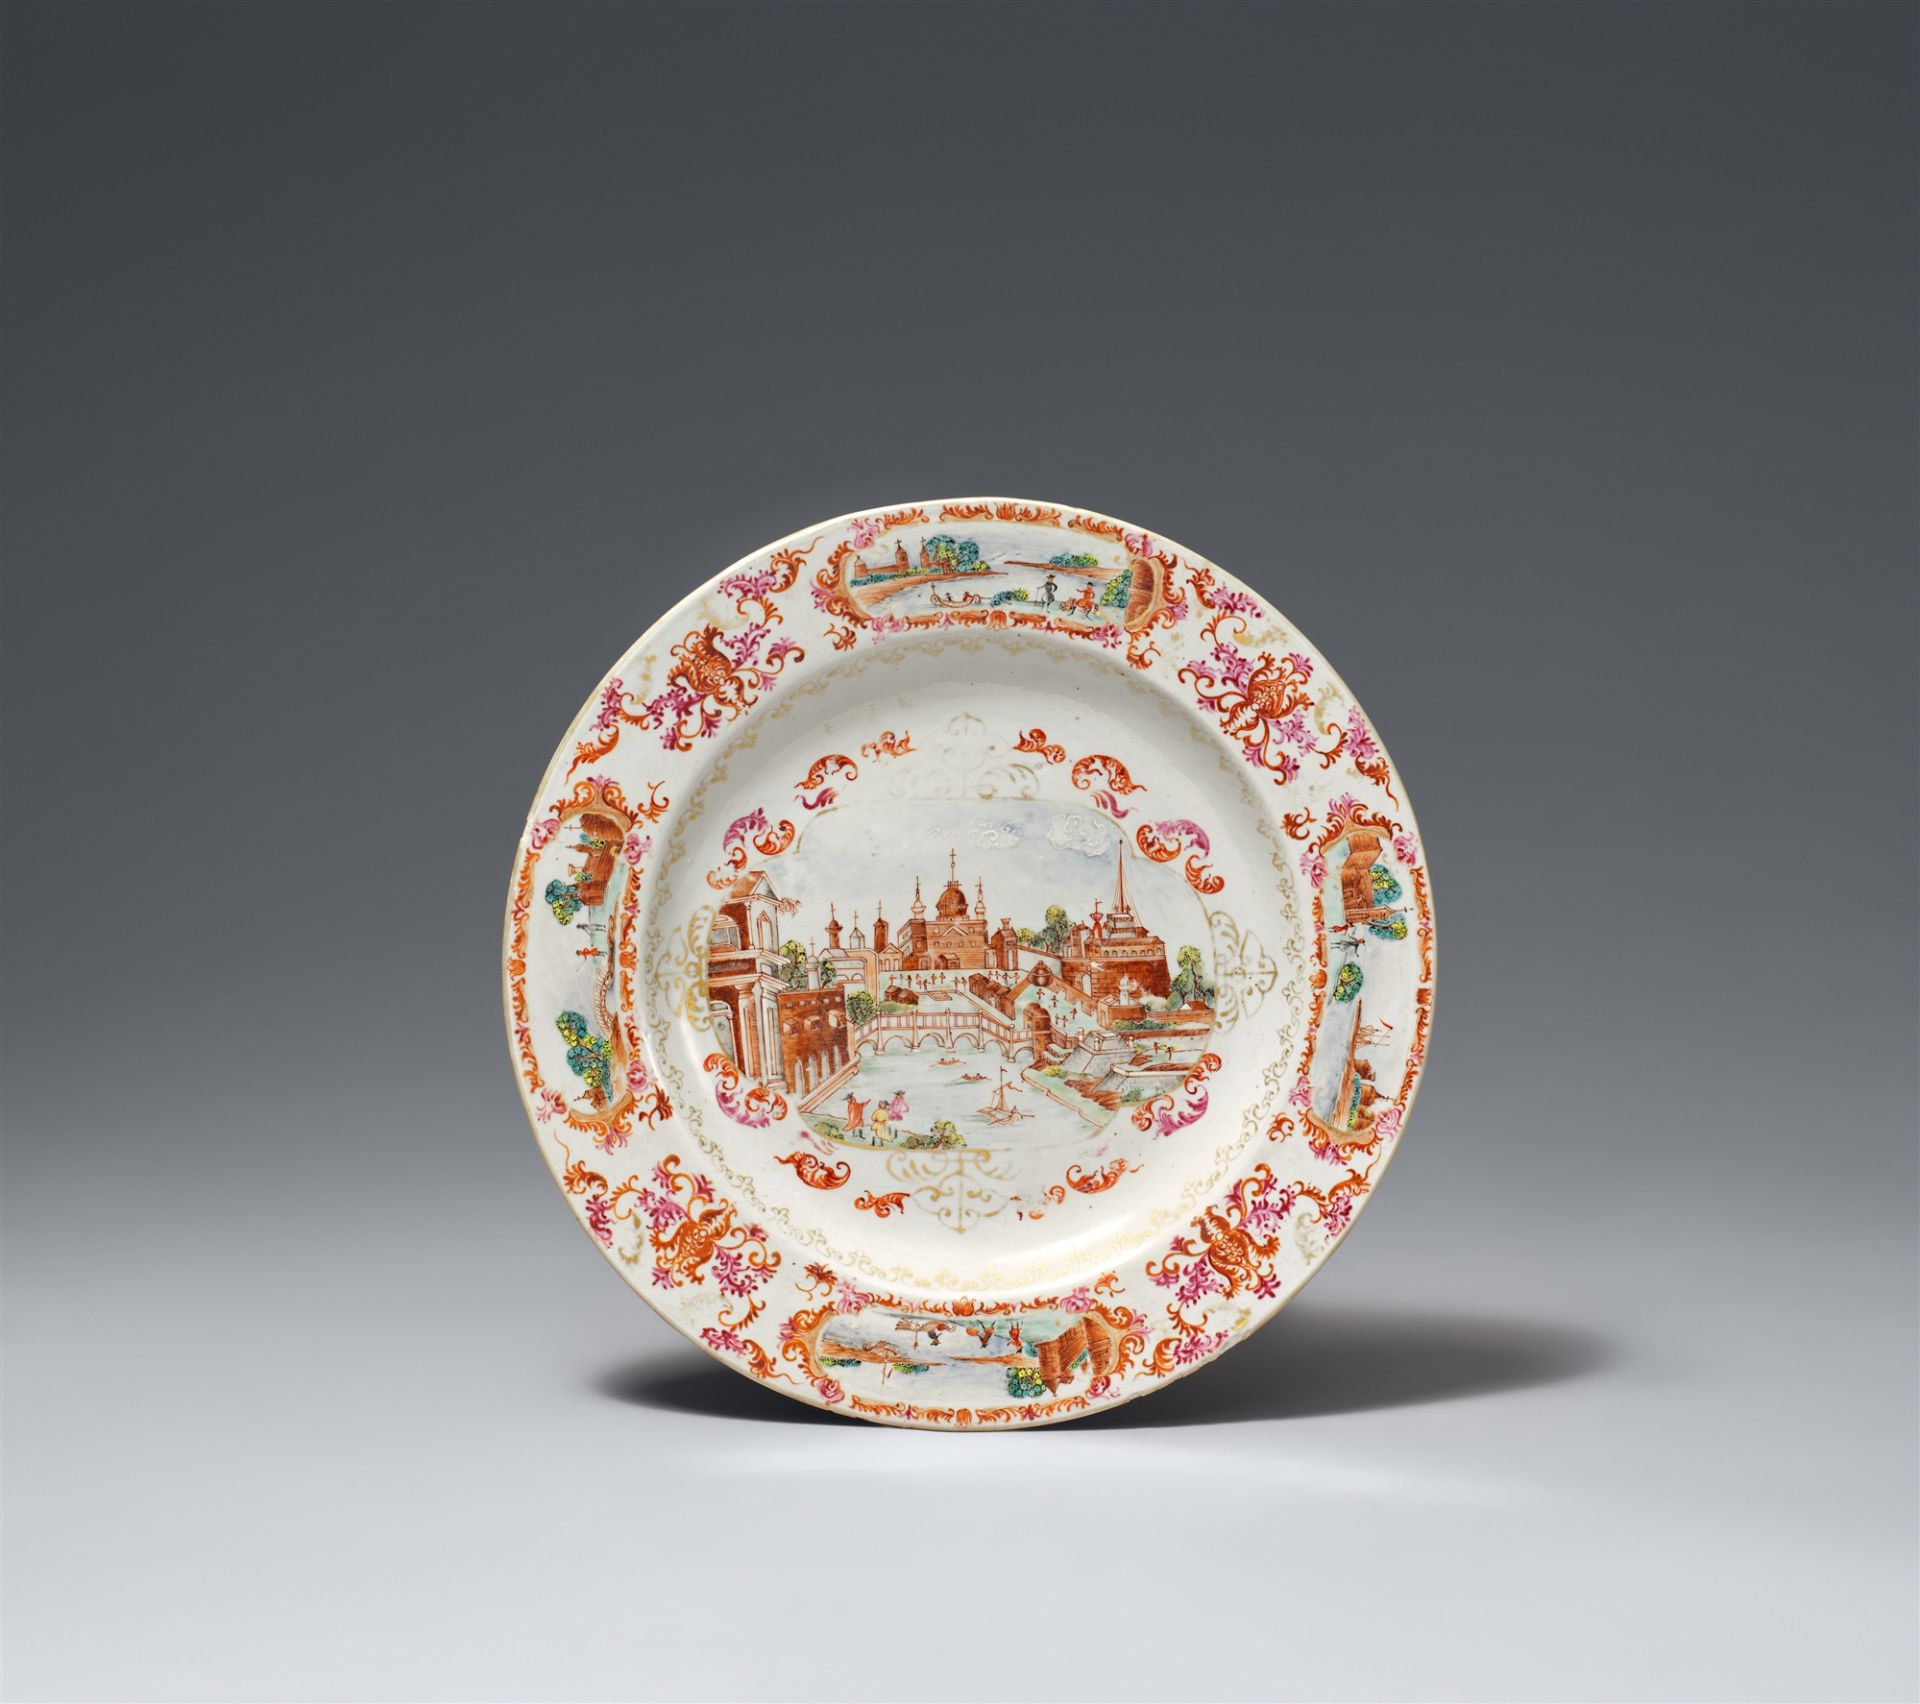 A rare Meissen-style famille rose plate. Qianlong period, around 1750-1760